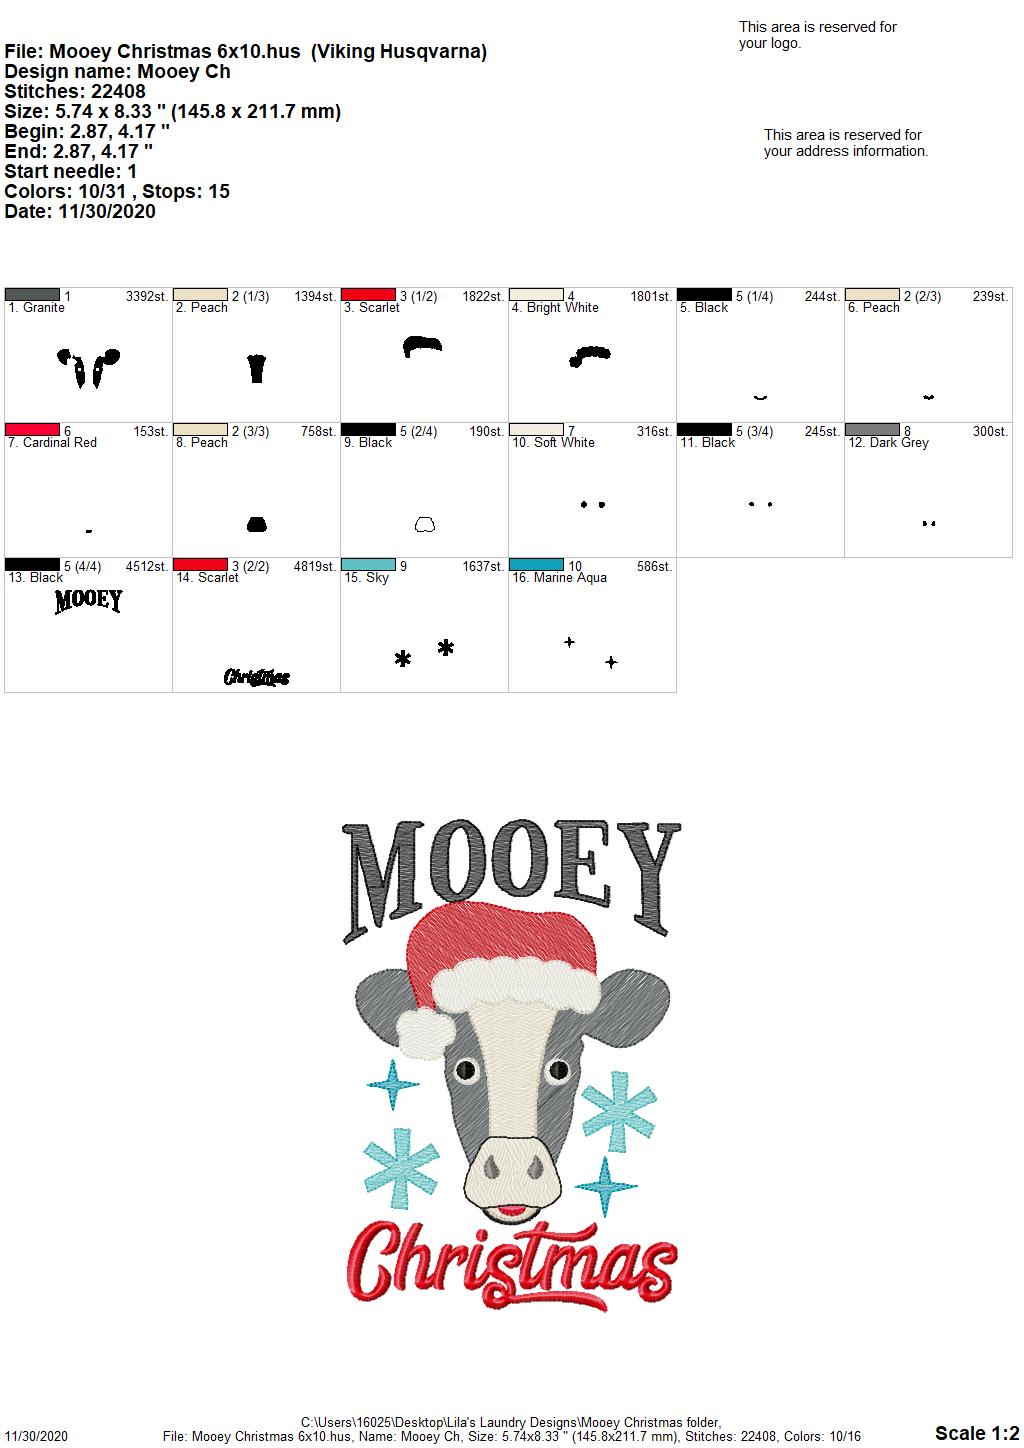 Mooey Christmas - 2 sizes - Digital Embroidery Design